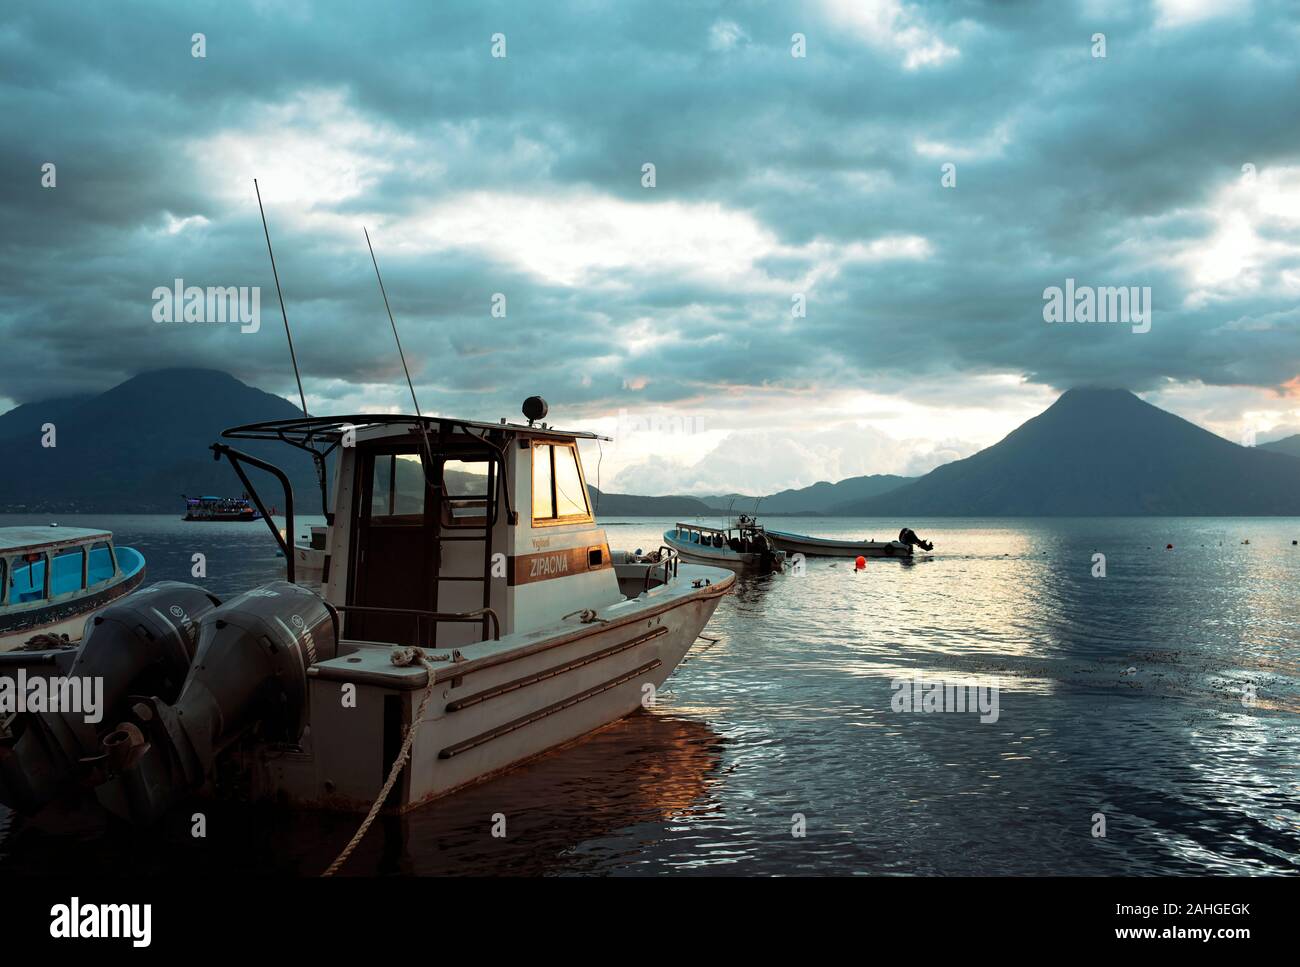 Fishing boat with dramatic, cloudy sunset and volcanoes. Lake Atitlán, Guatemala. Dec 2018 Stock Photo